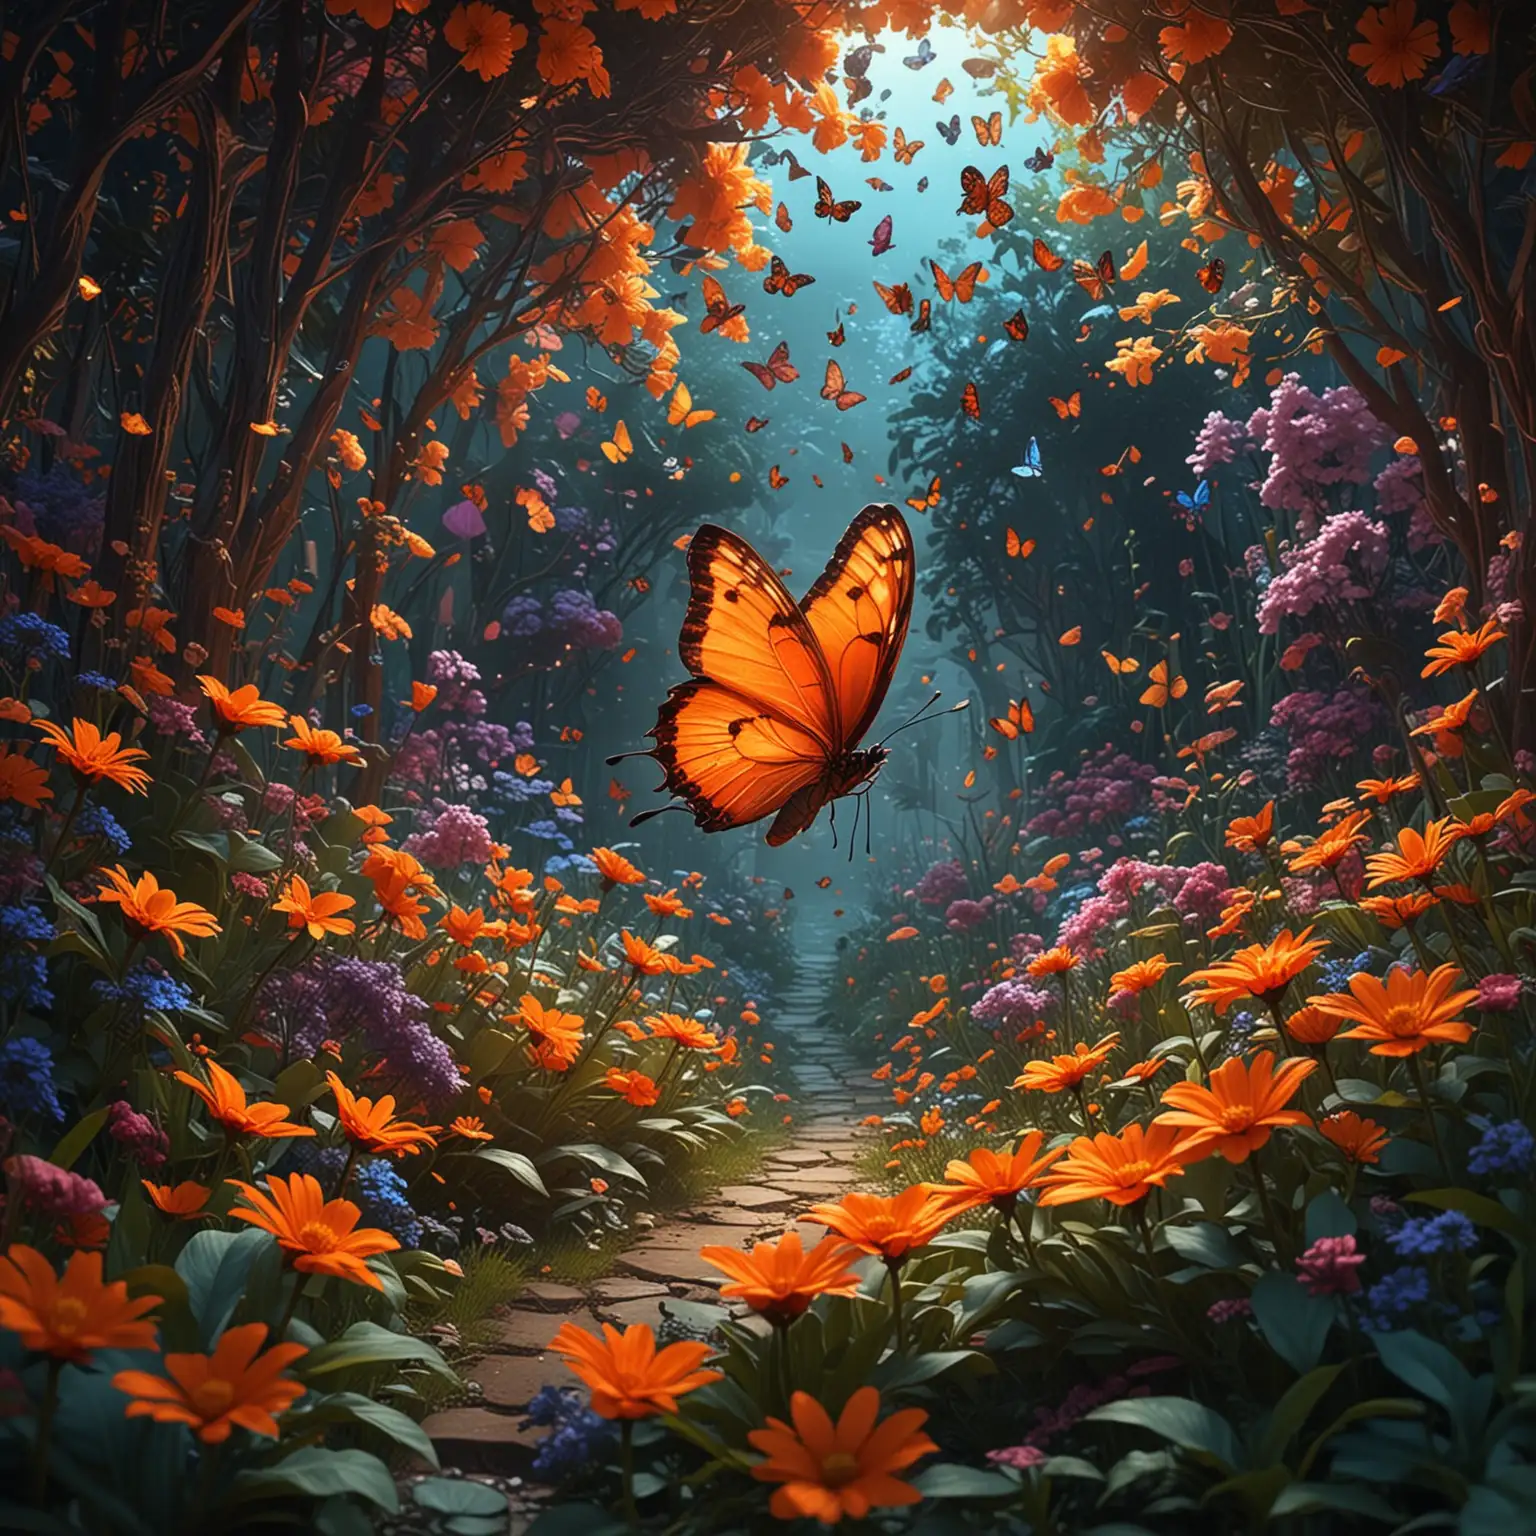 Glowing-Butterfly-in-a-Colorful-Garden-Contemporary-SciFi-Illustration